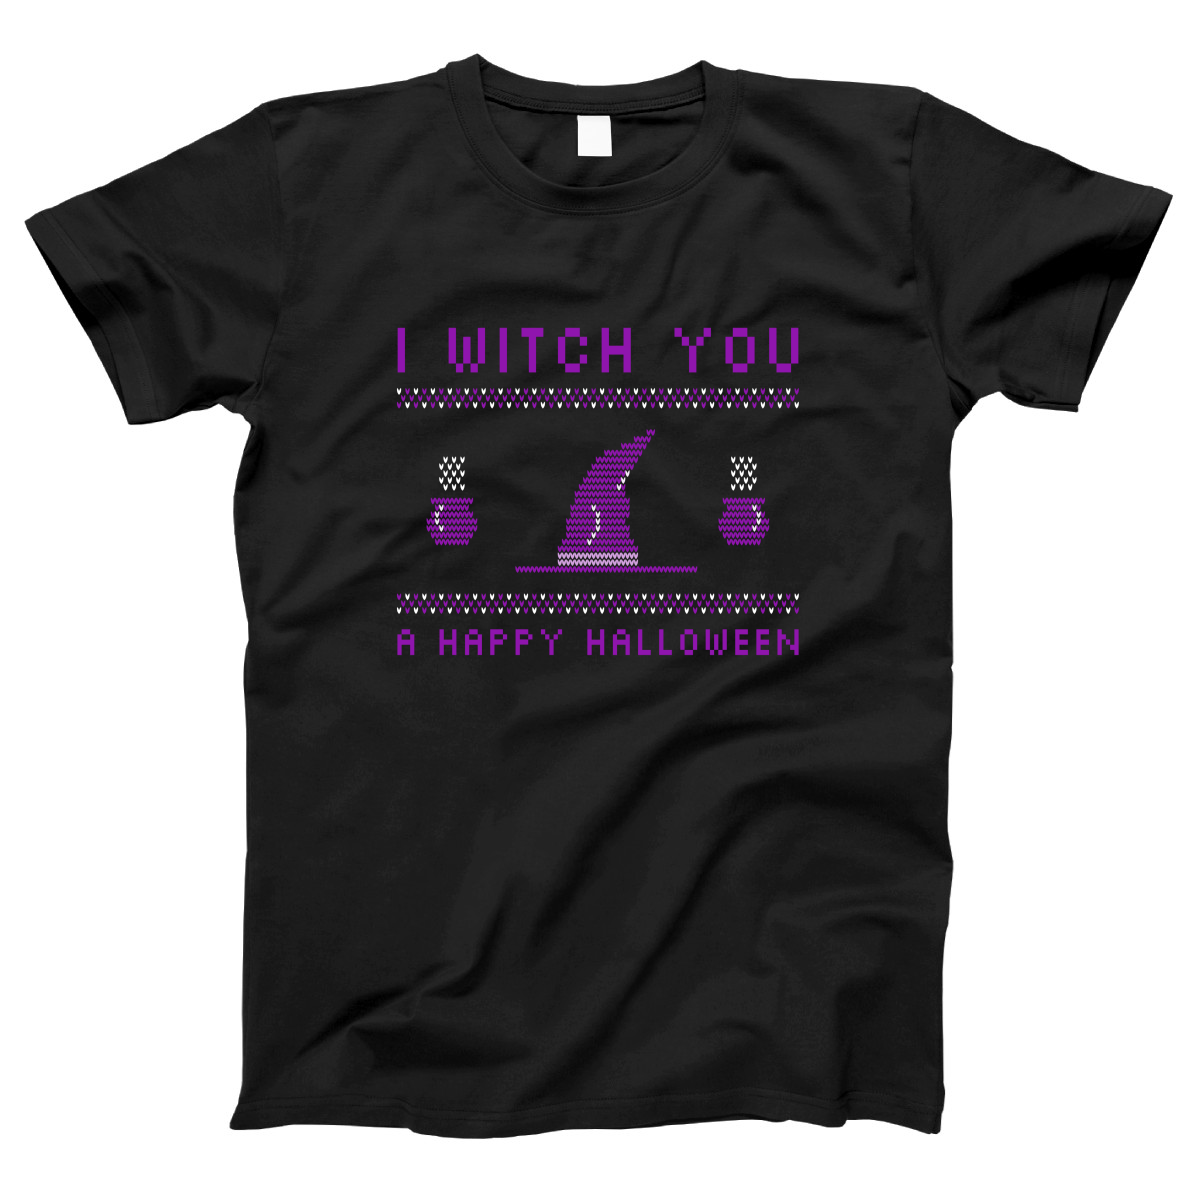 I Witch You a Happy Halloween Women's T-shirt | Black